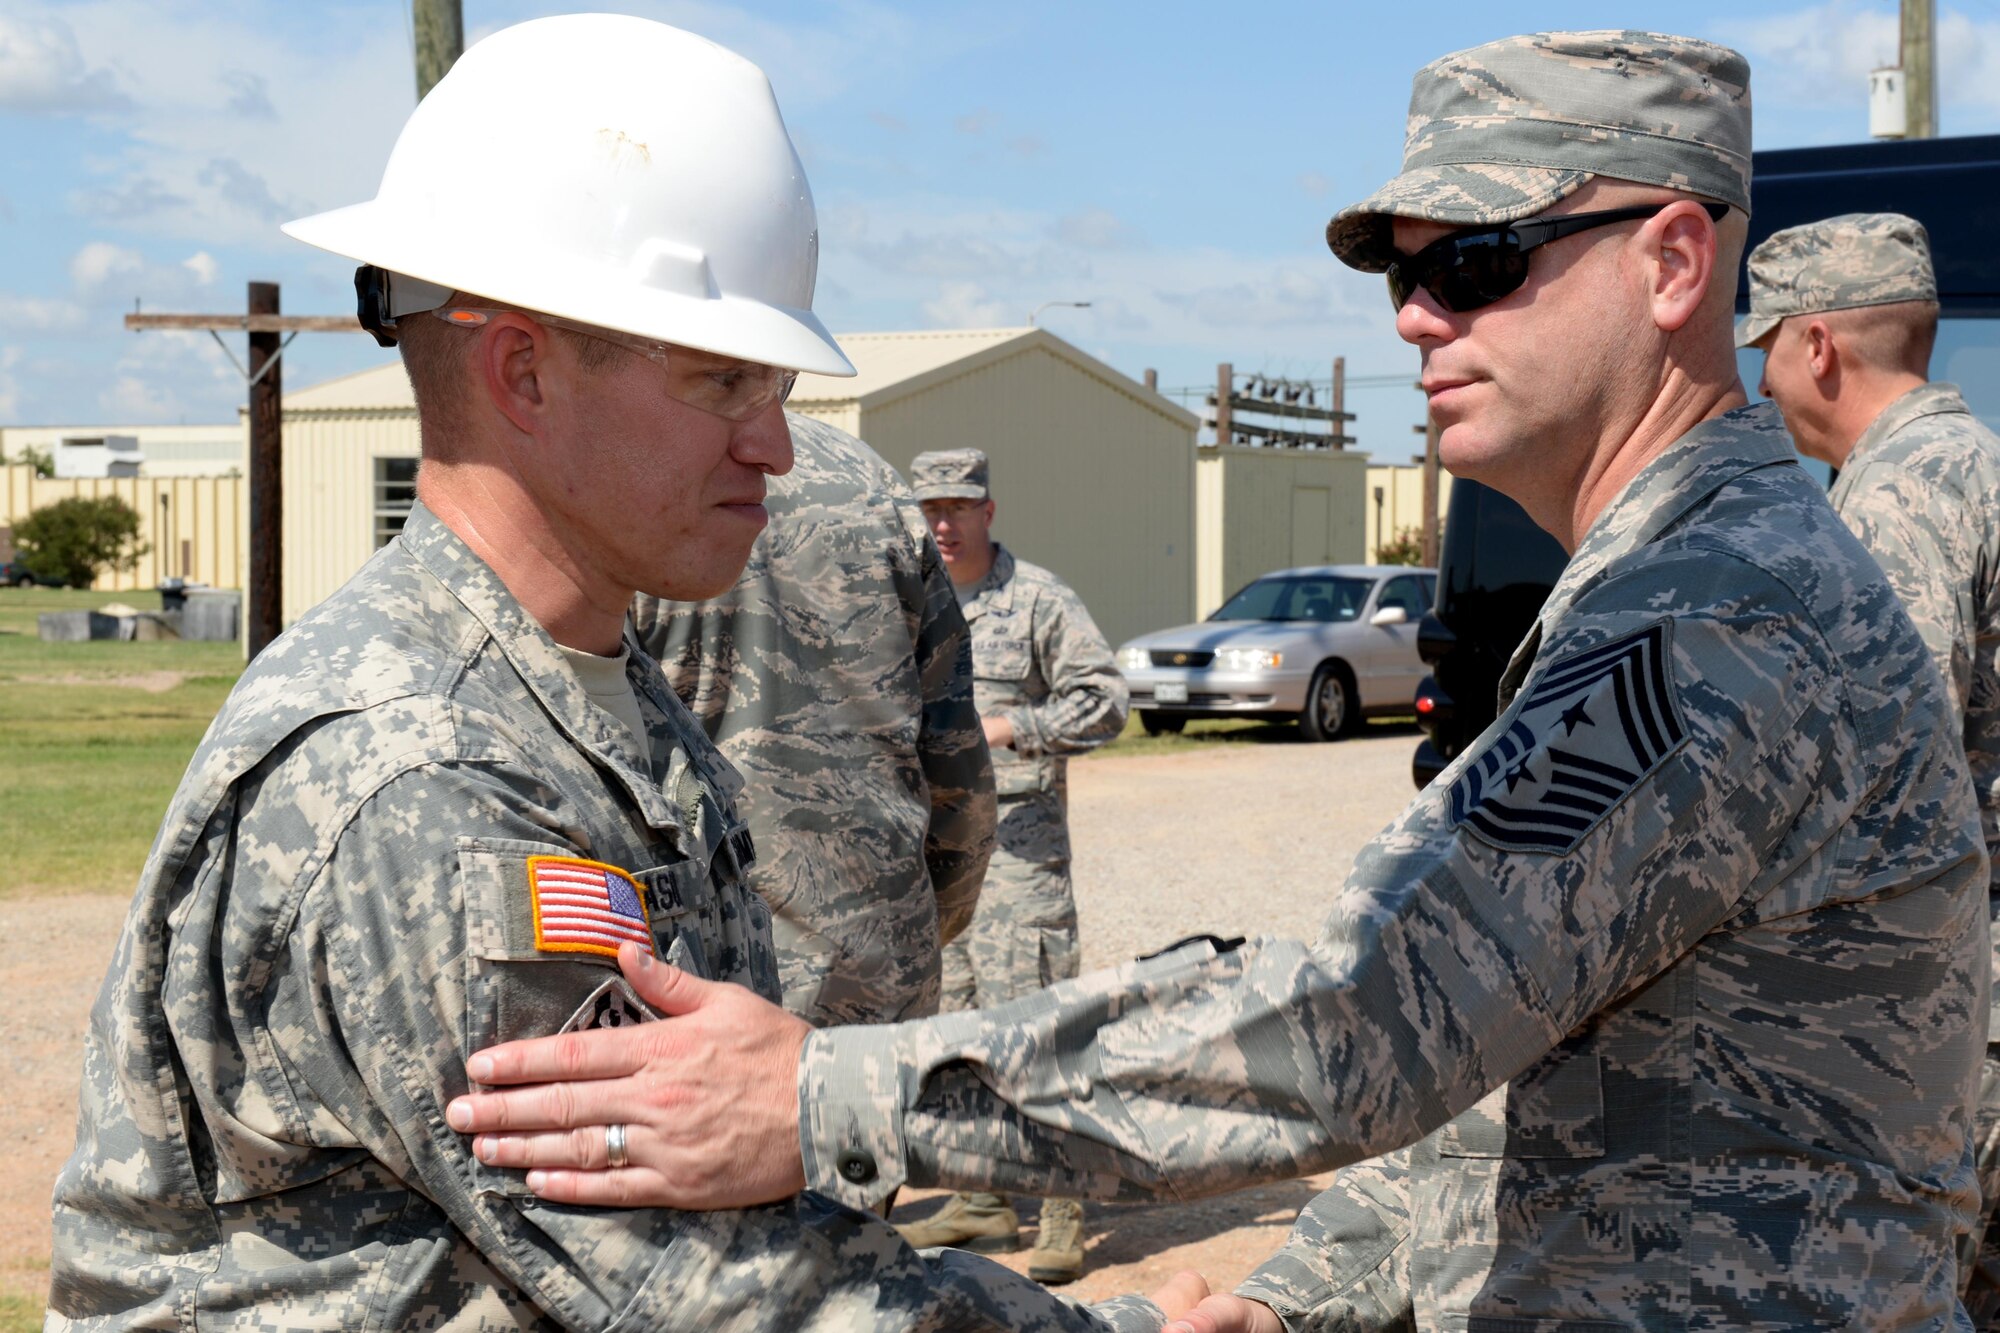 Command Chief Master Sgt. David Staton, Air Education and Training Command, shakes hands with U.S. Army Staff Sgt. Brad Eason, 366th Training Squadron electrical engineer instructor, after a brief course introduction at Sheppard Air Force Base, Texas, June 29, 2016. The chief visited Sheppard for three days for a familiarization tour of its training mission and capabilities. 